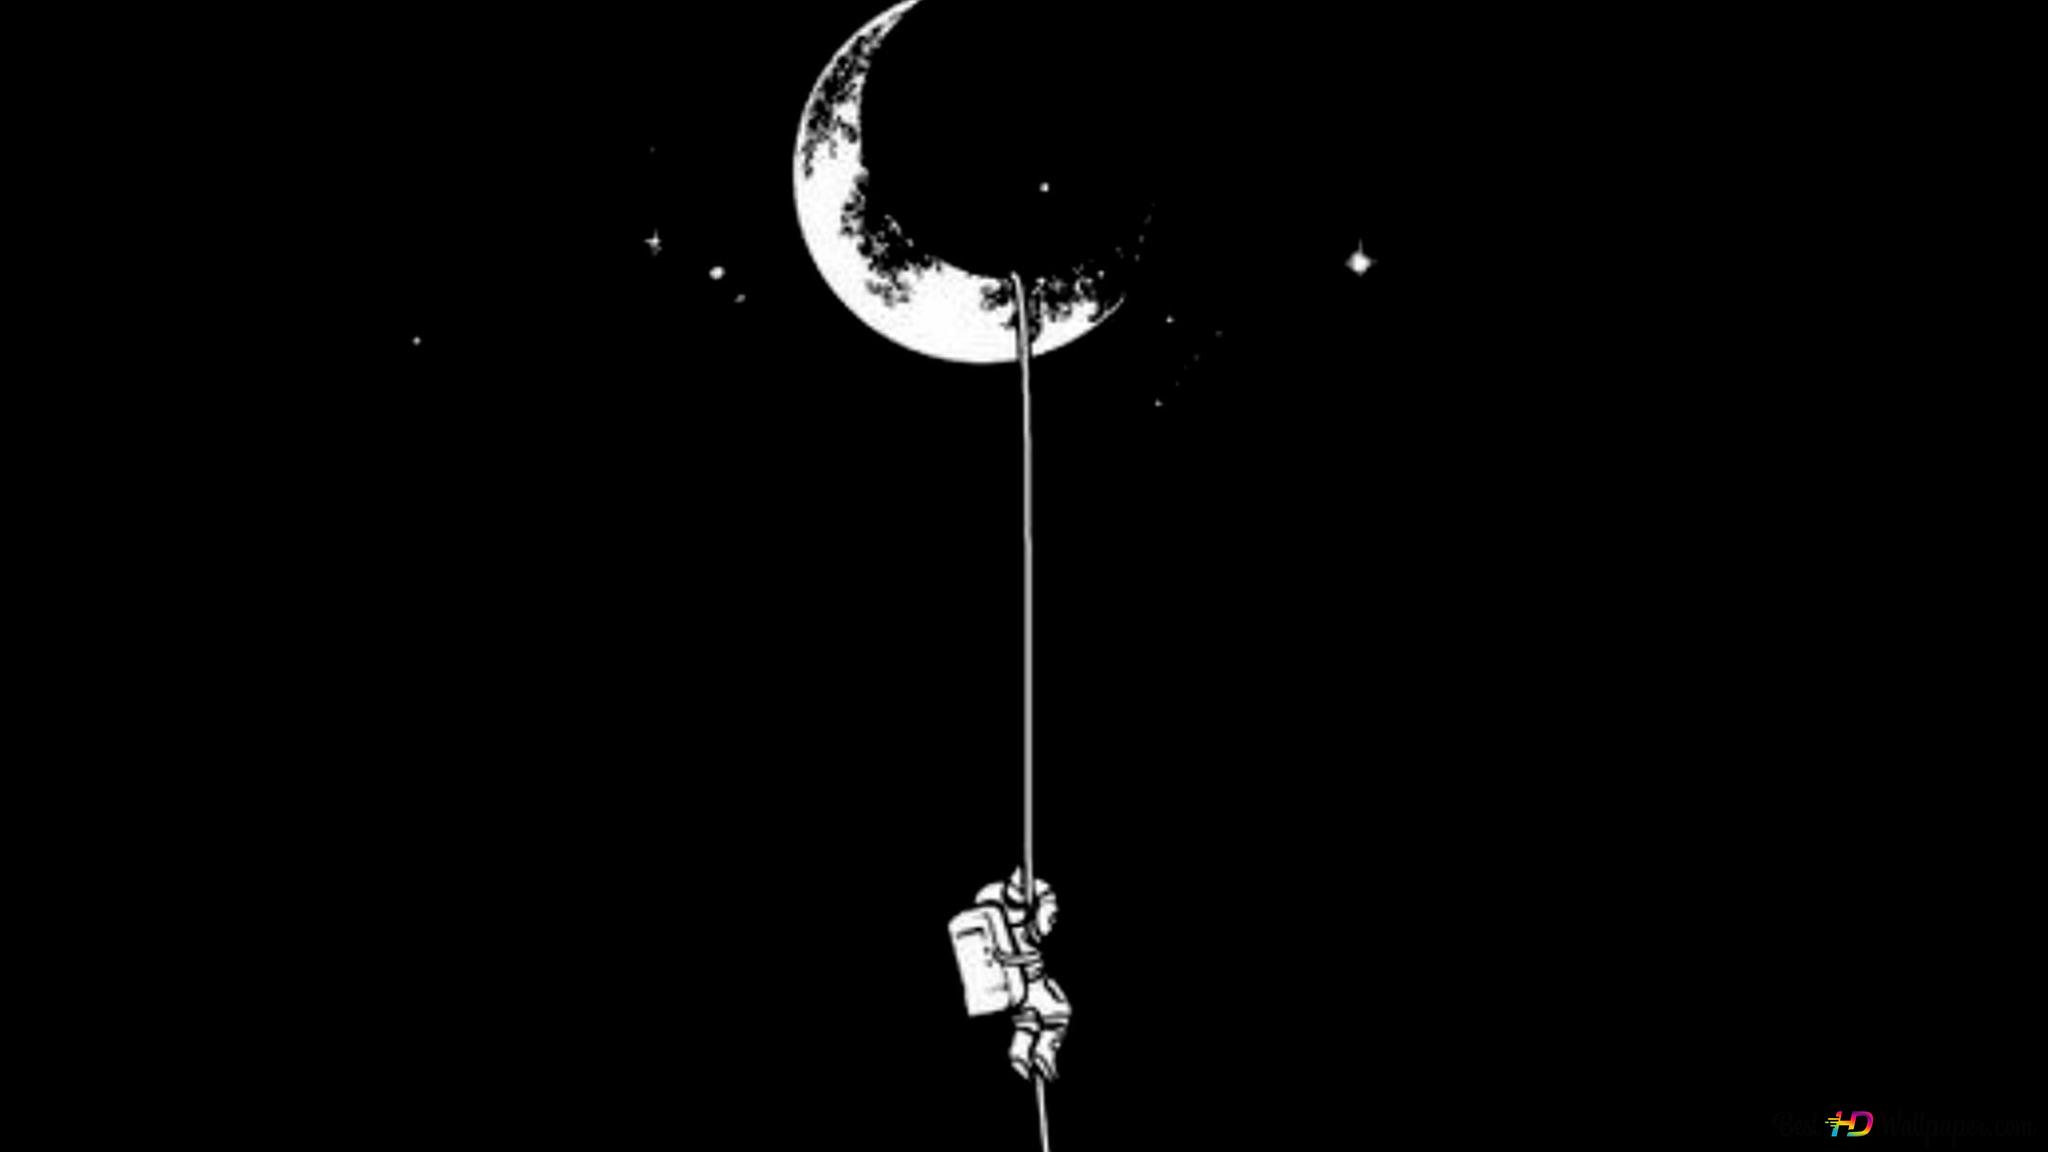 Black and white anime drawing of astronauts climbing half moon on dark background 2K wallpaper download